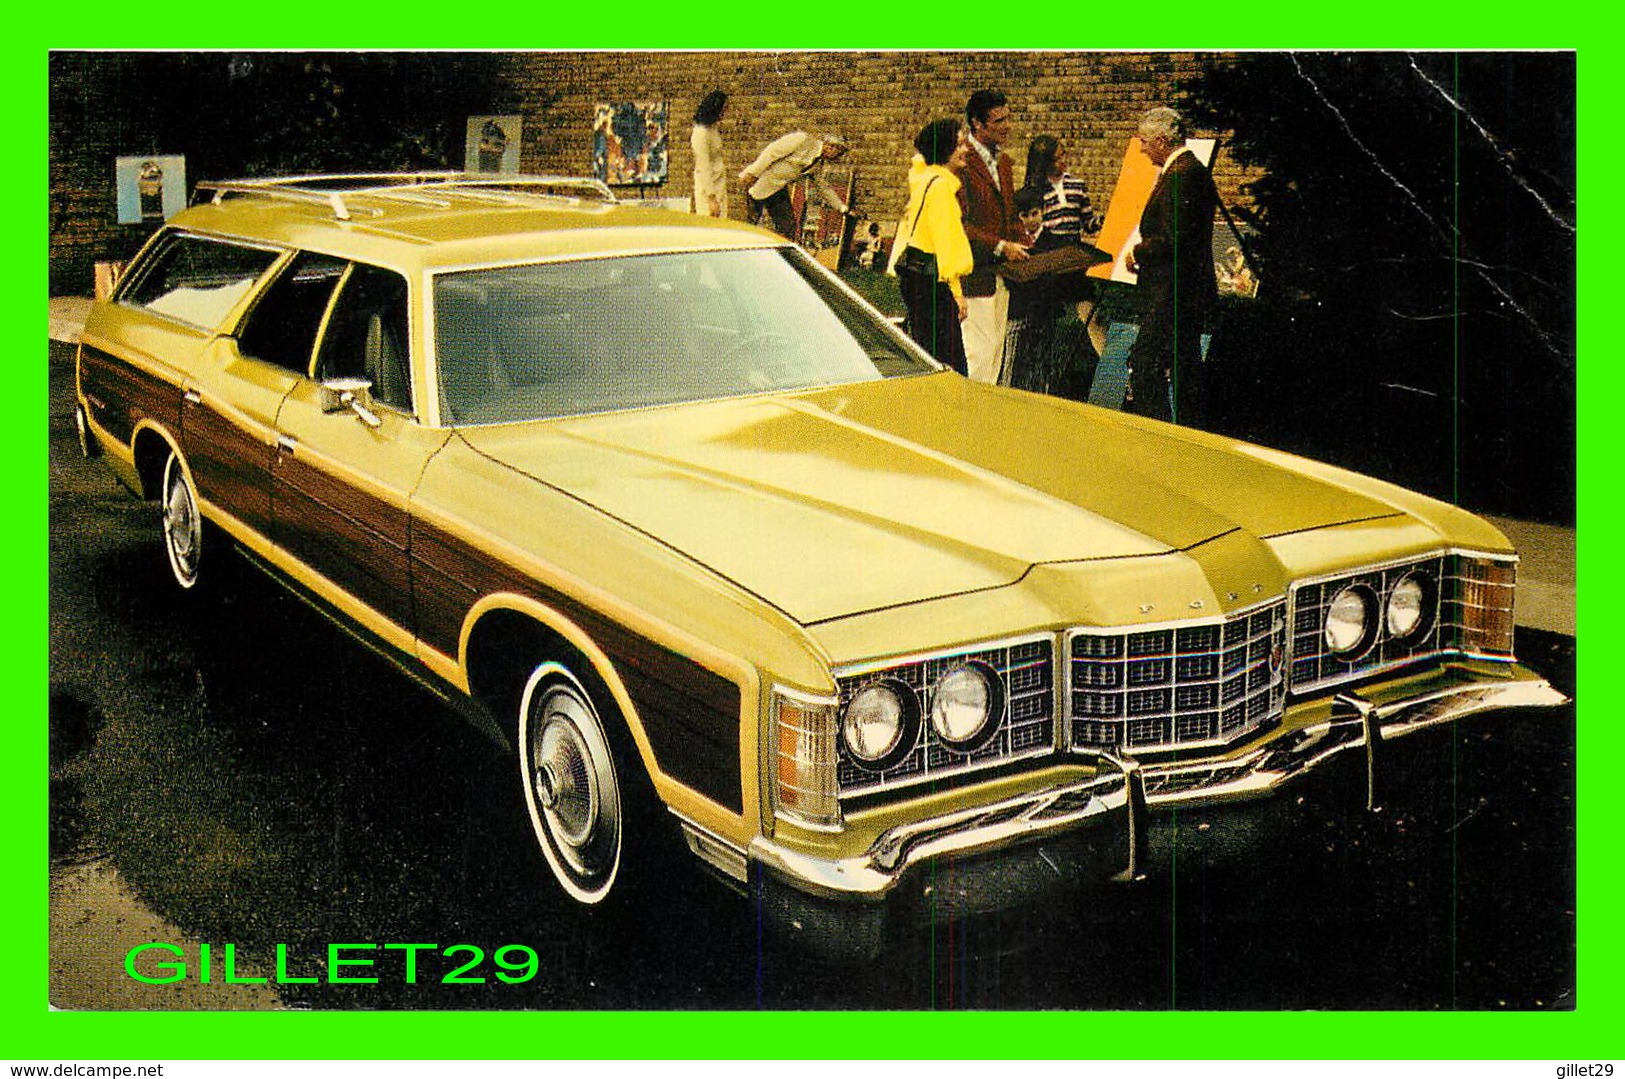 VOITURES DE TOURISME - 1973 FORD LTD COUNTRY SQUIRE STATION WAGON - ADVERTISING OF COLONIAL FORD INC, NY - TRAVEL - - Voitures De Tourisme